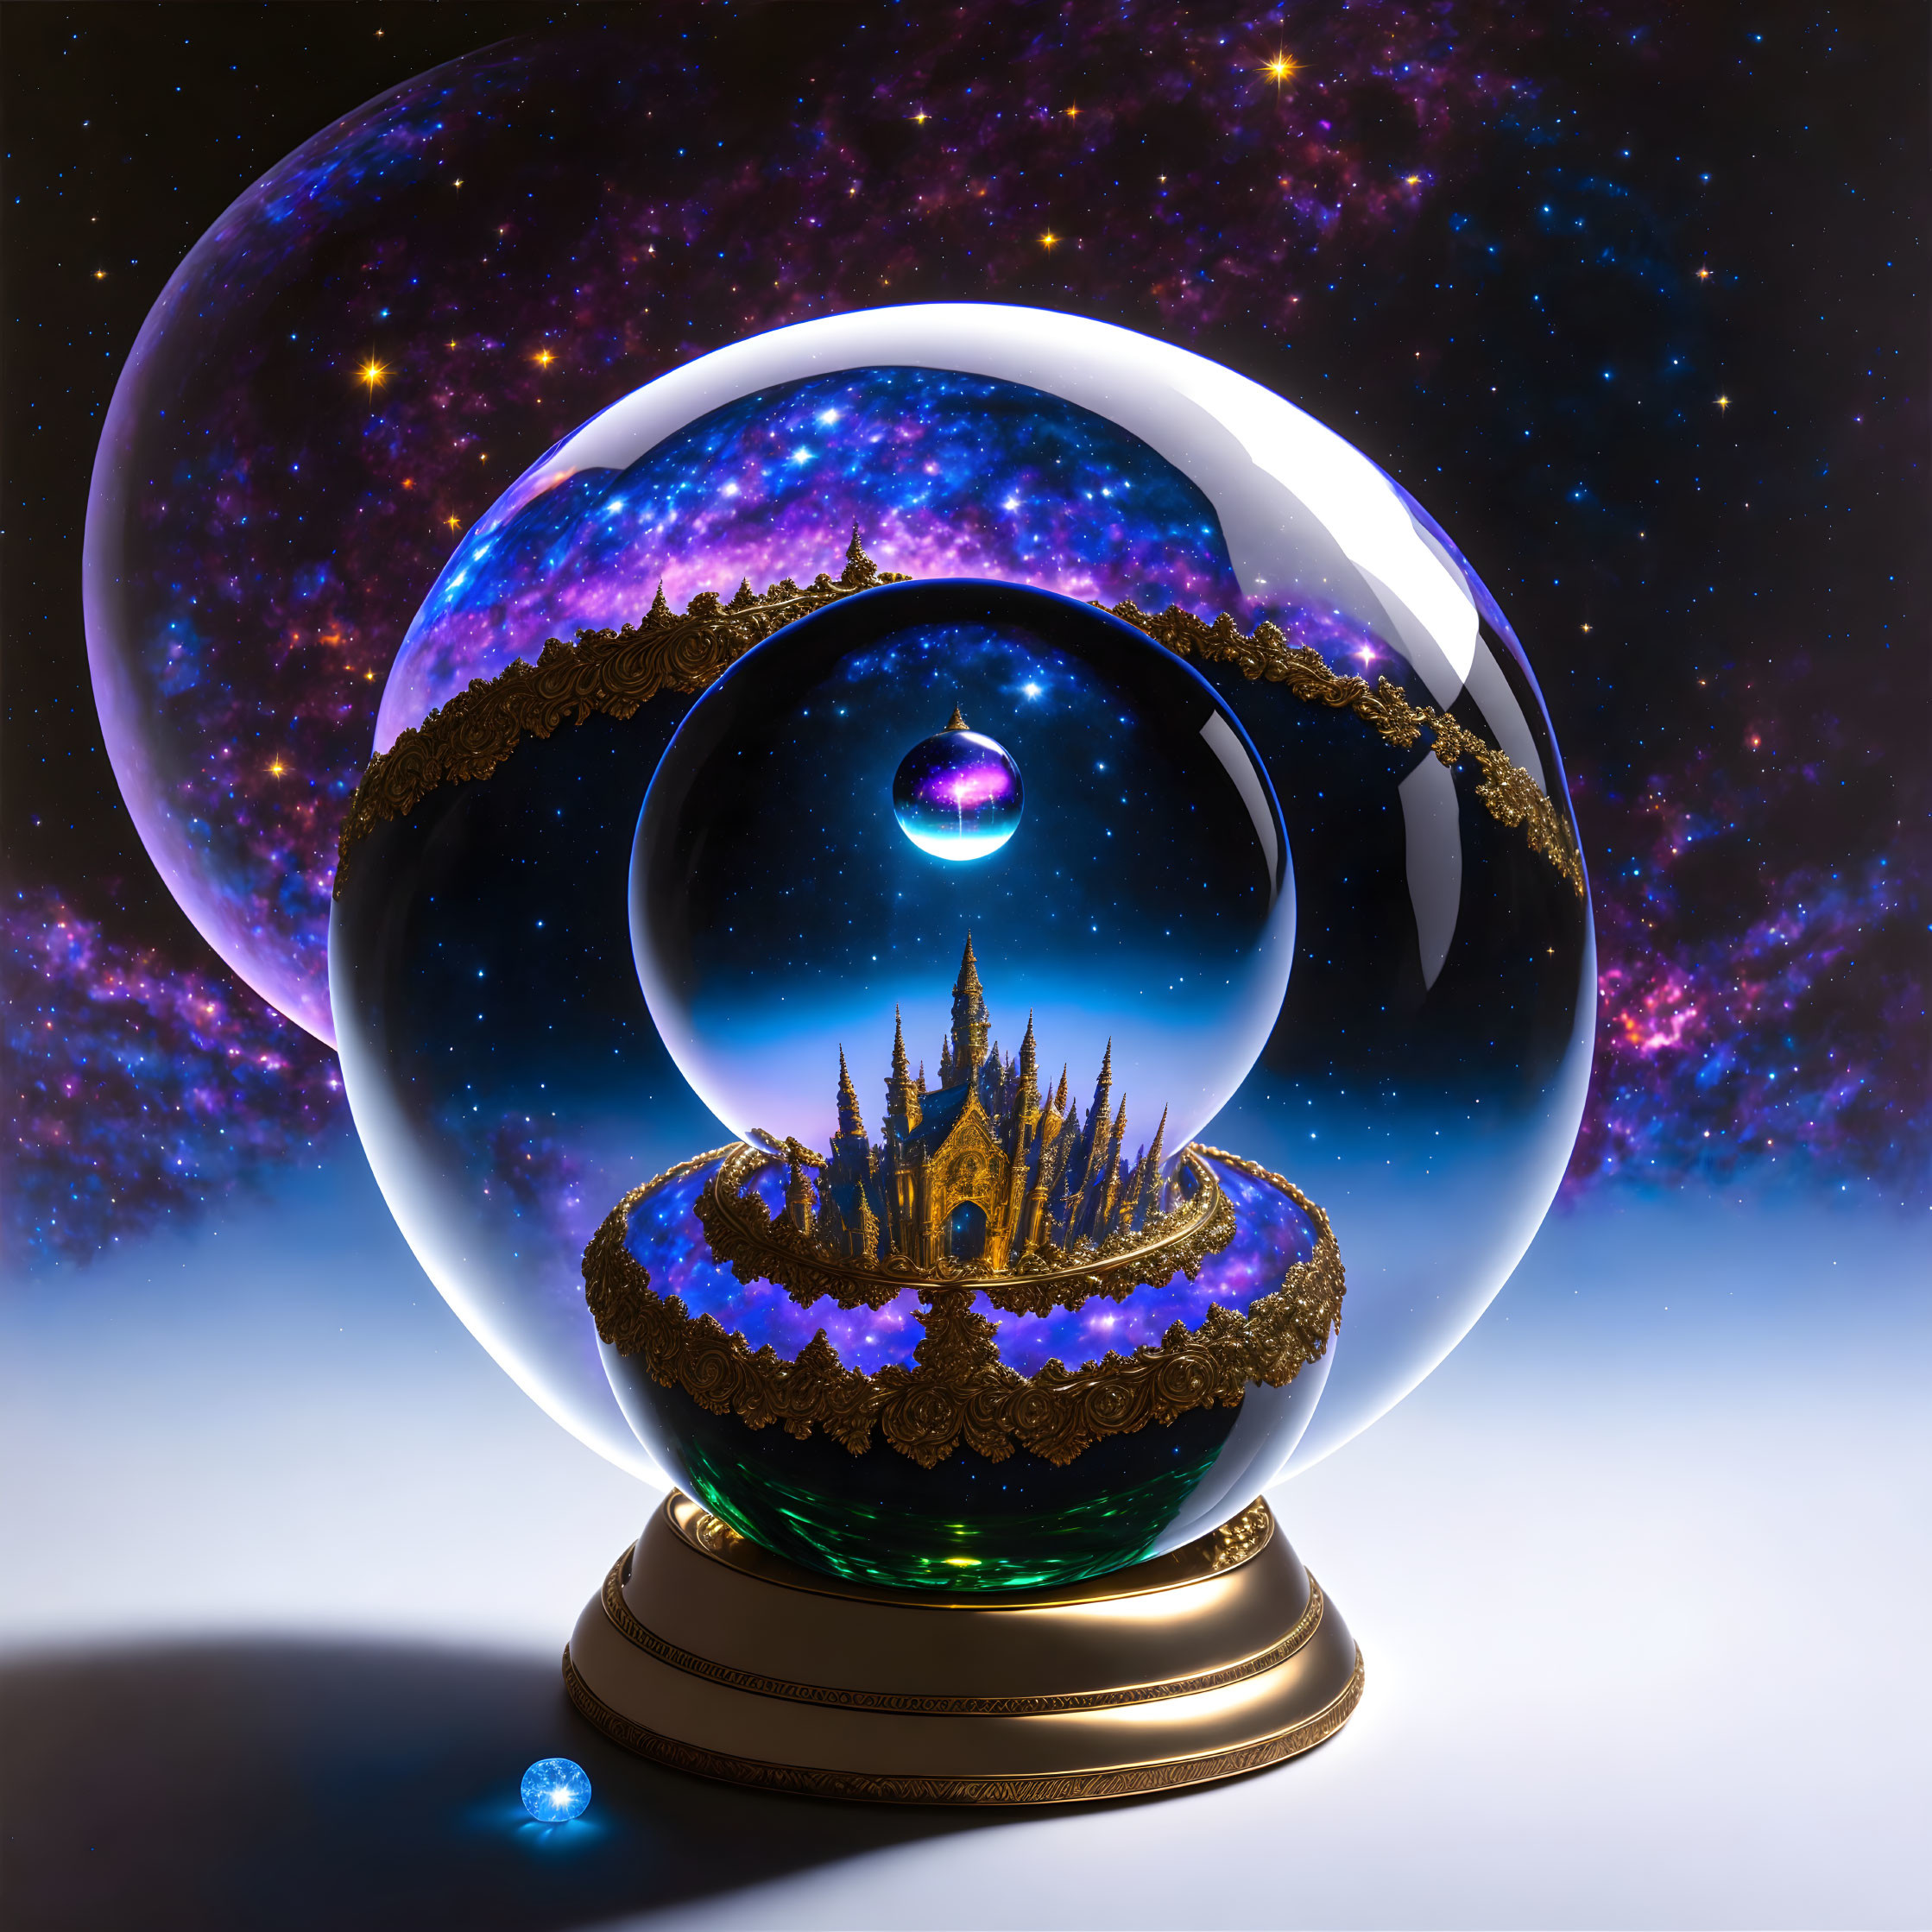 Fantasy Landscape with Castle in Crystal Ball Display